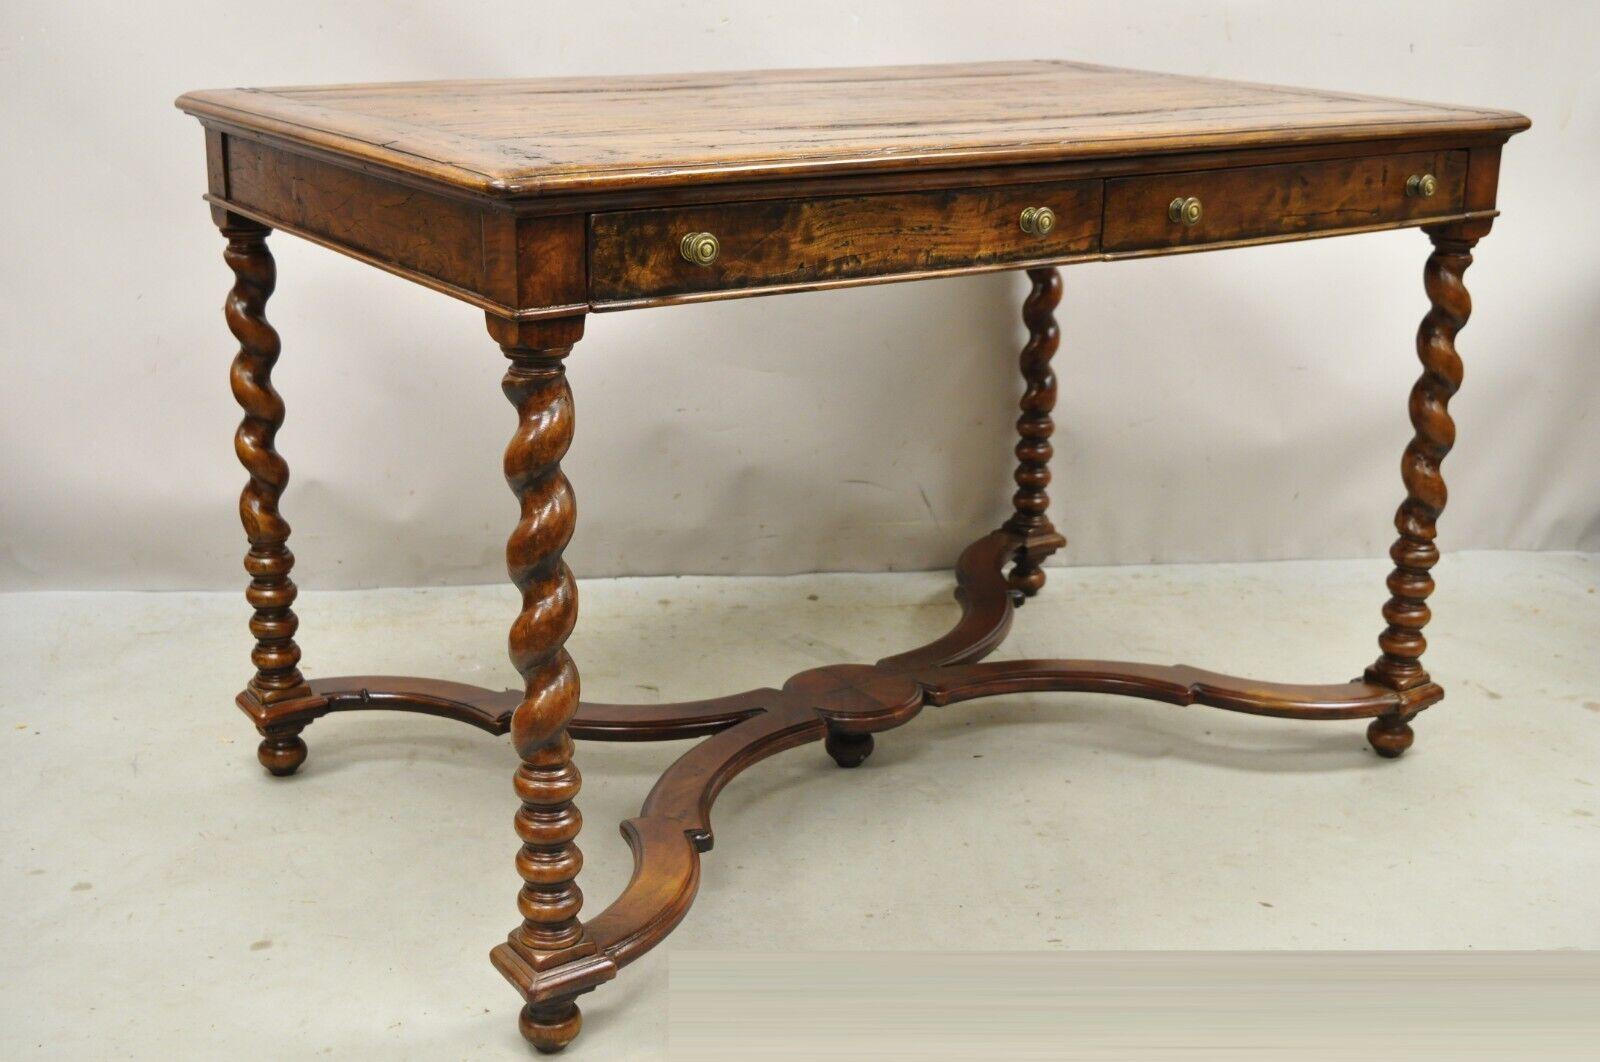 Quality English Louis XIII Style Walnut 2 Drawer Desk Table with Spiral Legs. Item features a magnificent antiqued/aged finish, turn carved spiral legs, carved stretcher base, solid wood construction, beautiful wood grain, 2 dovetailed drawers, very